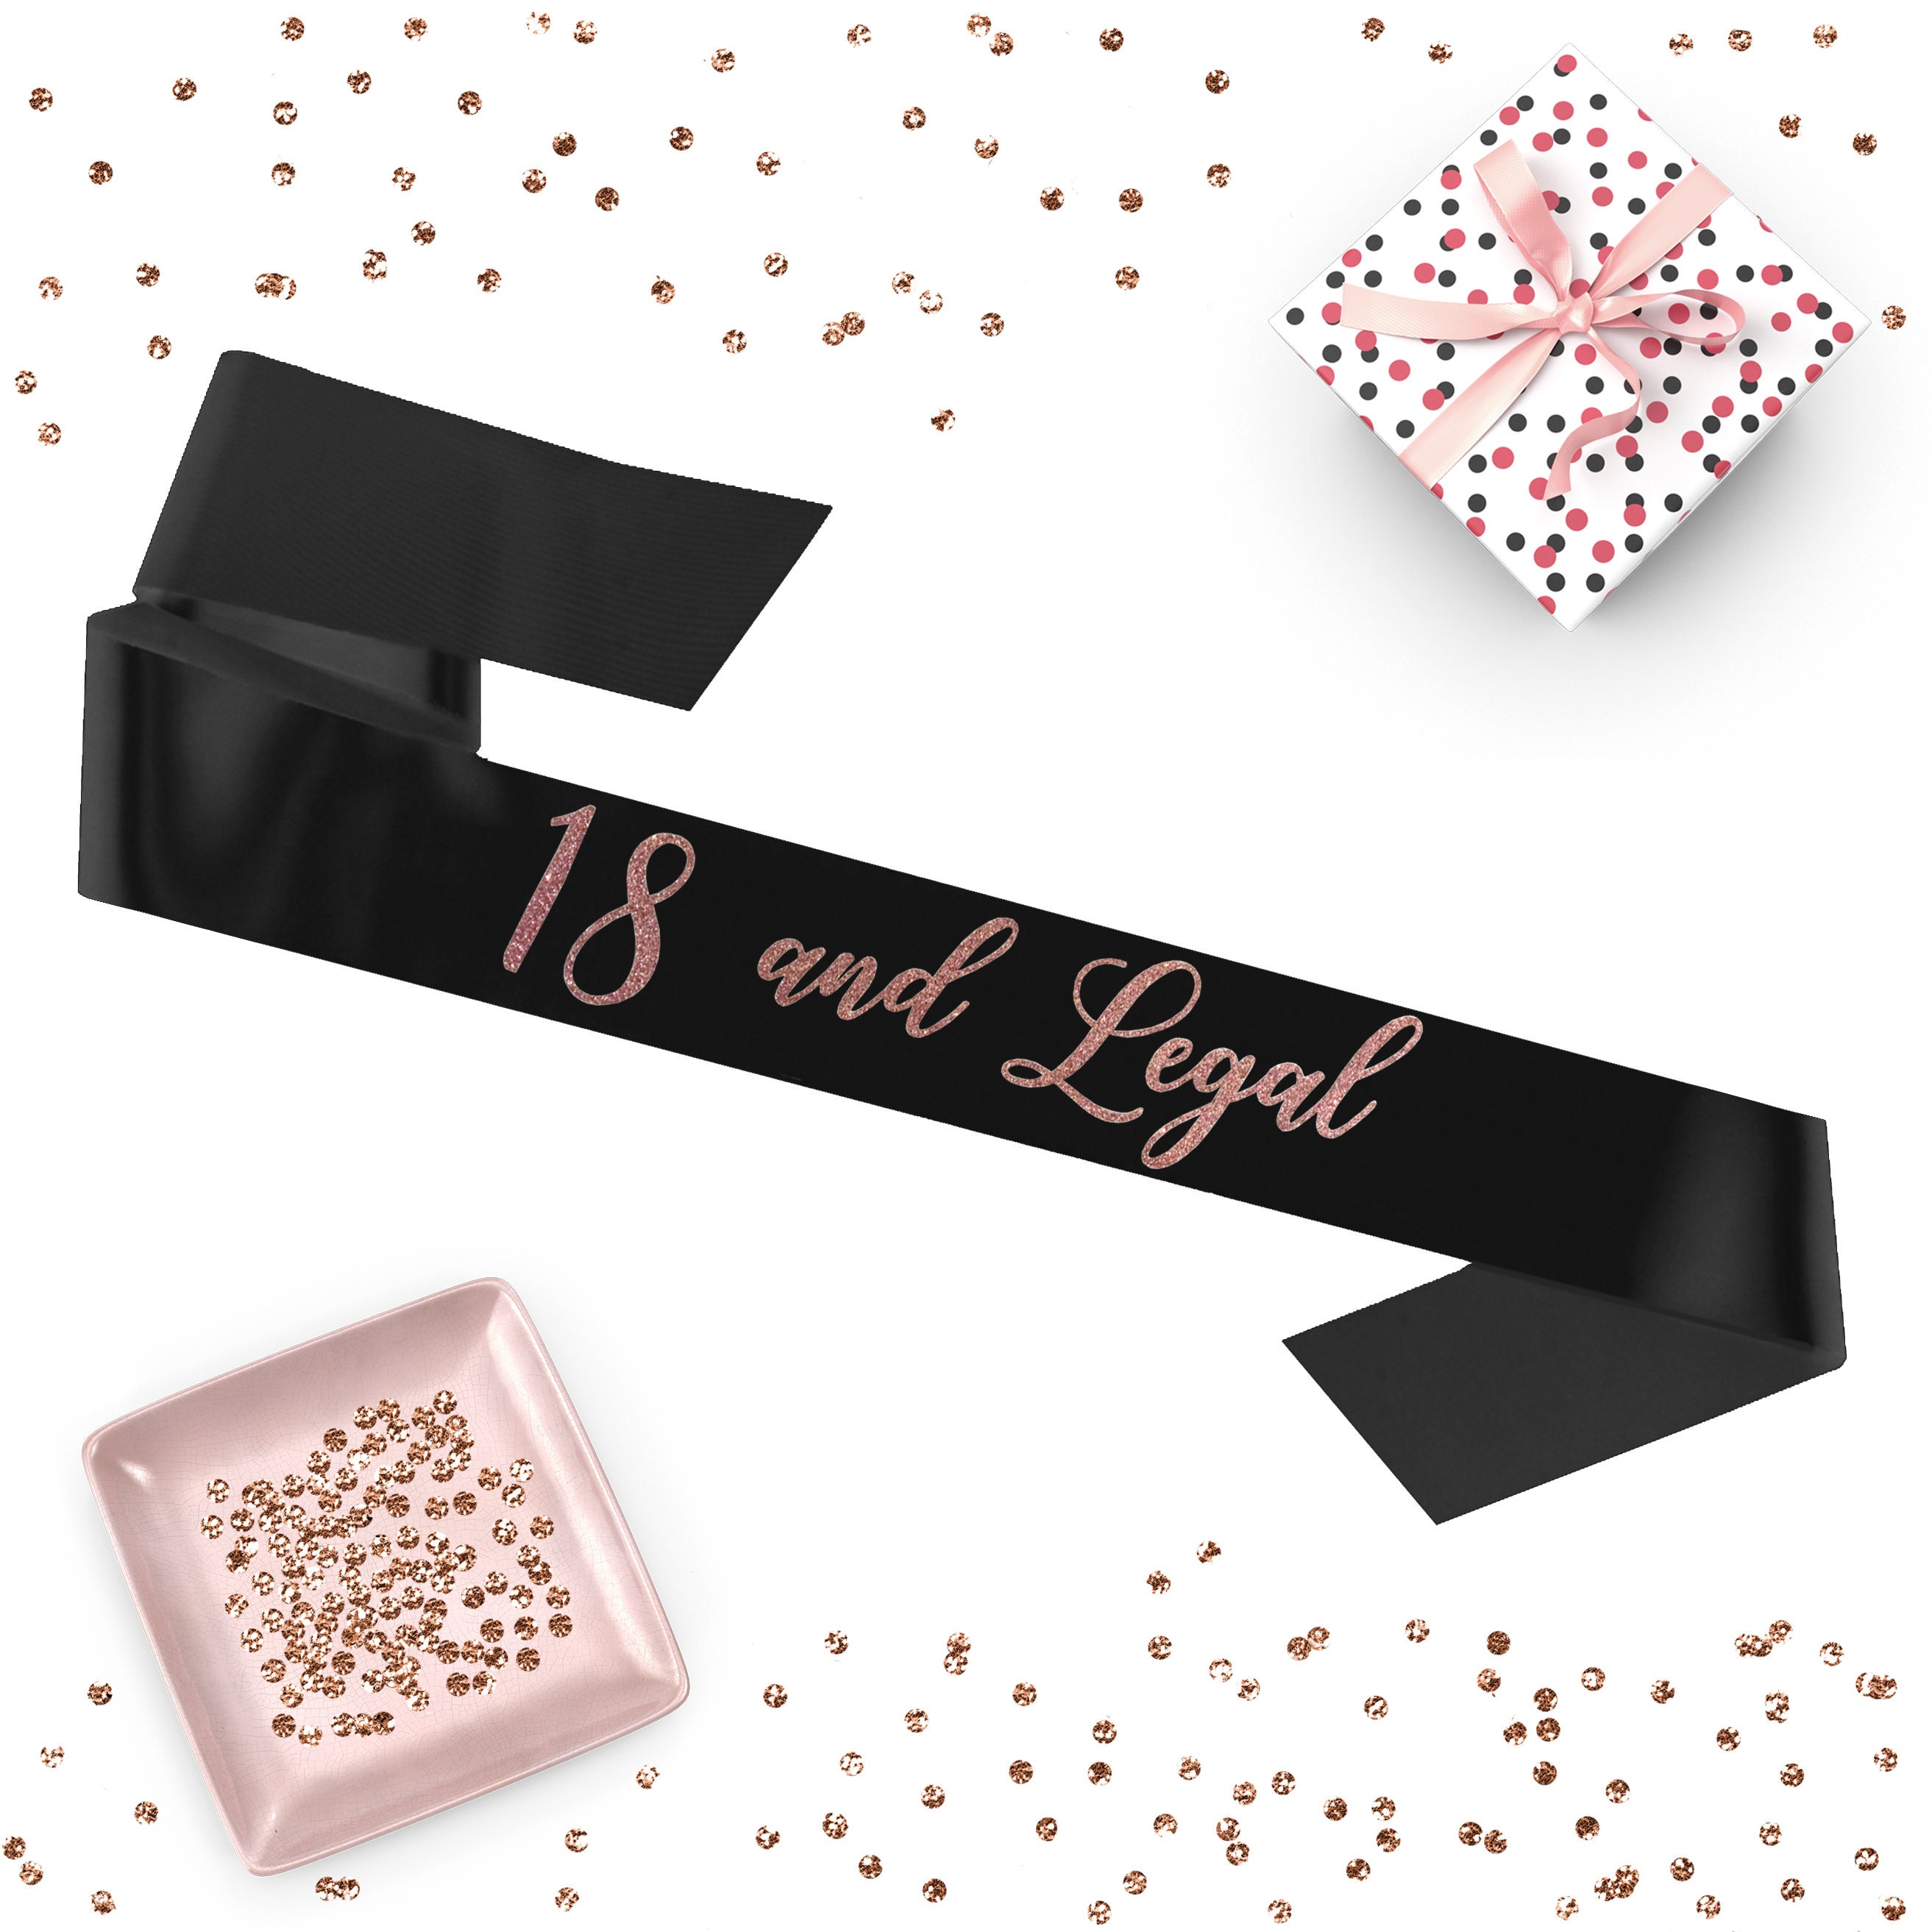 1 Piece 18 and Legal Script Sash Luxurious Satin Rose Gold - Etsy